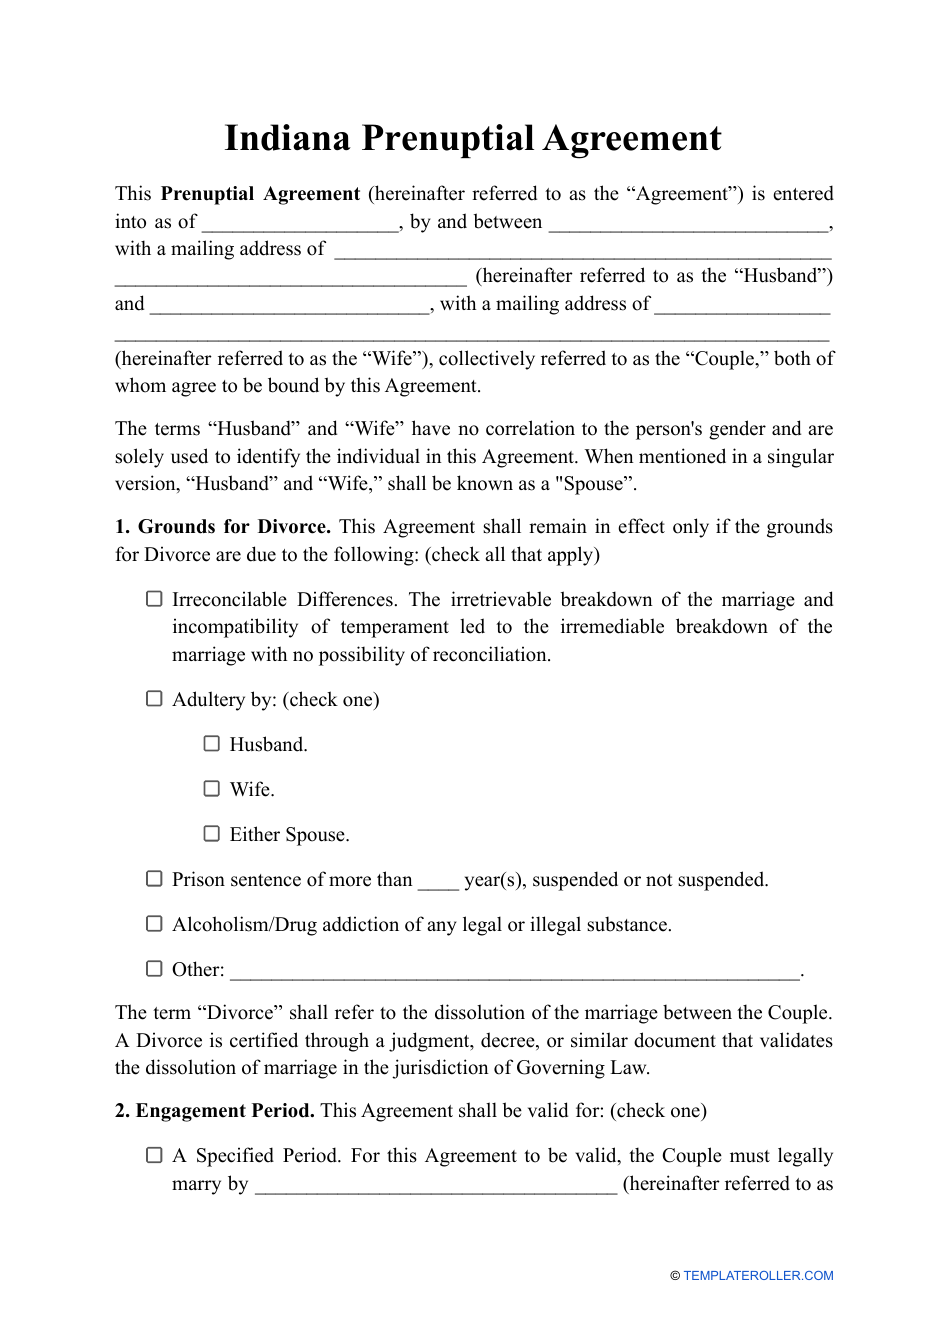 Prenuptial Agreement Template - Indiana, Page 1